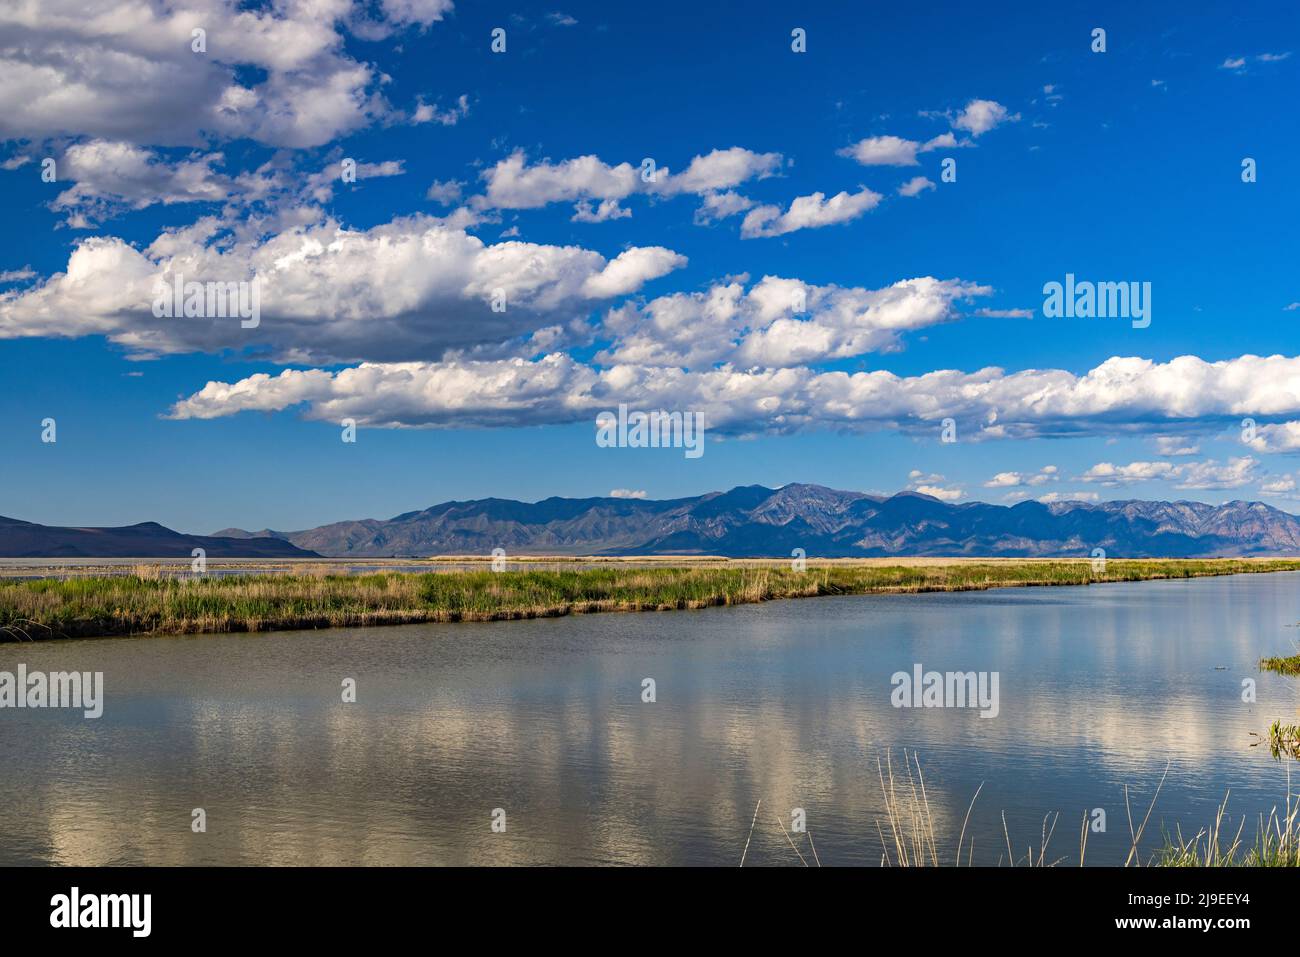 This is a view of the fair weather cumlulus clouds on a spectacular day at Bear River Migratory Bird Refuge west of Brigham City, Box Elder County, Ut Stock Photo